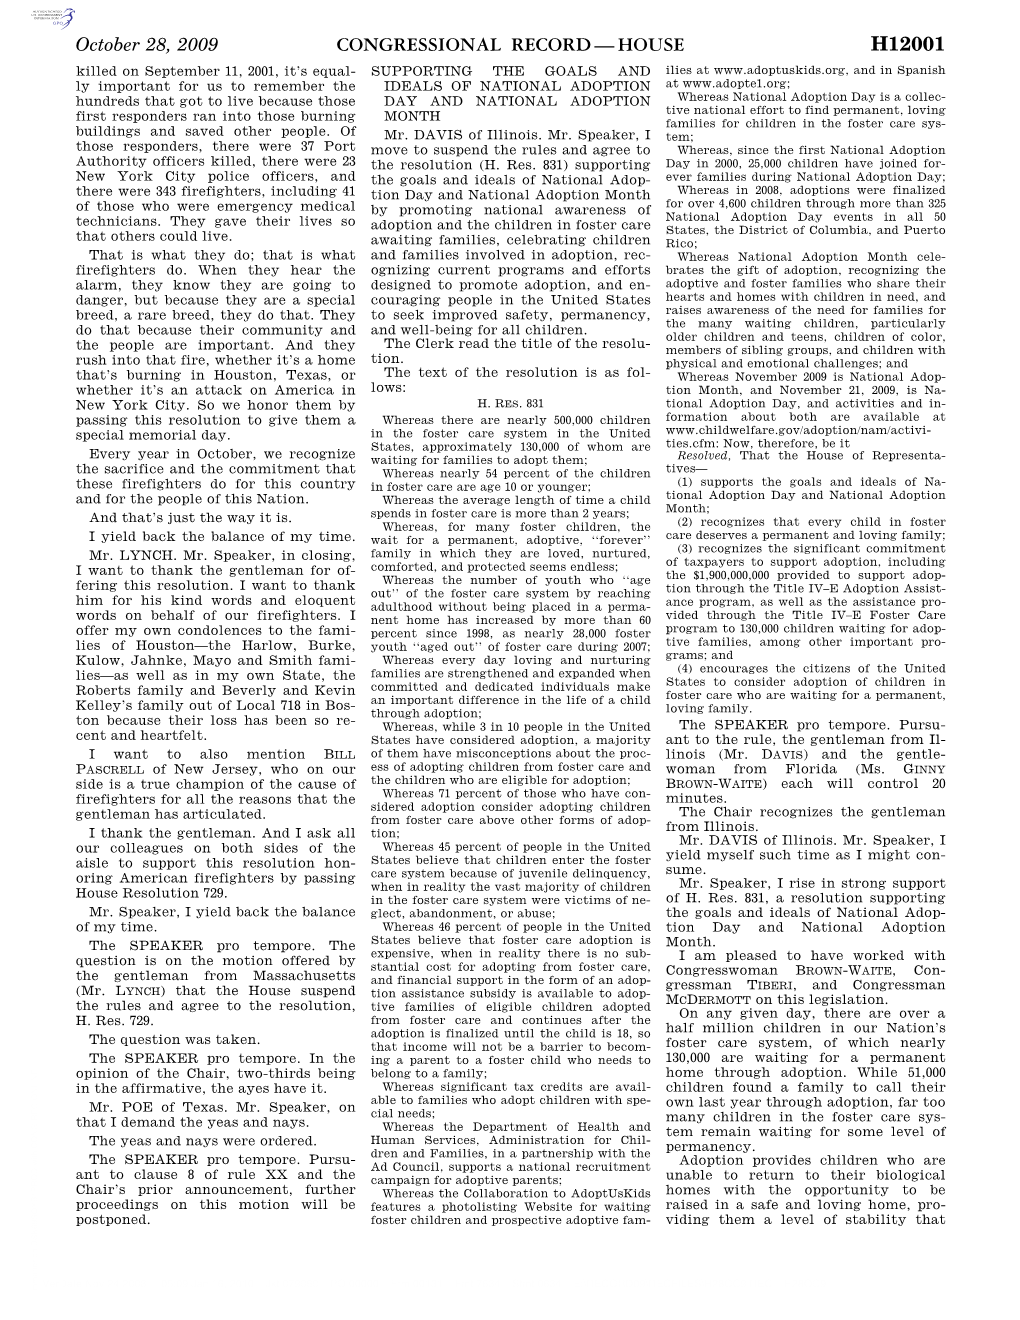 Congressional Record—House H12001